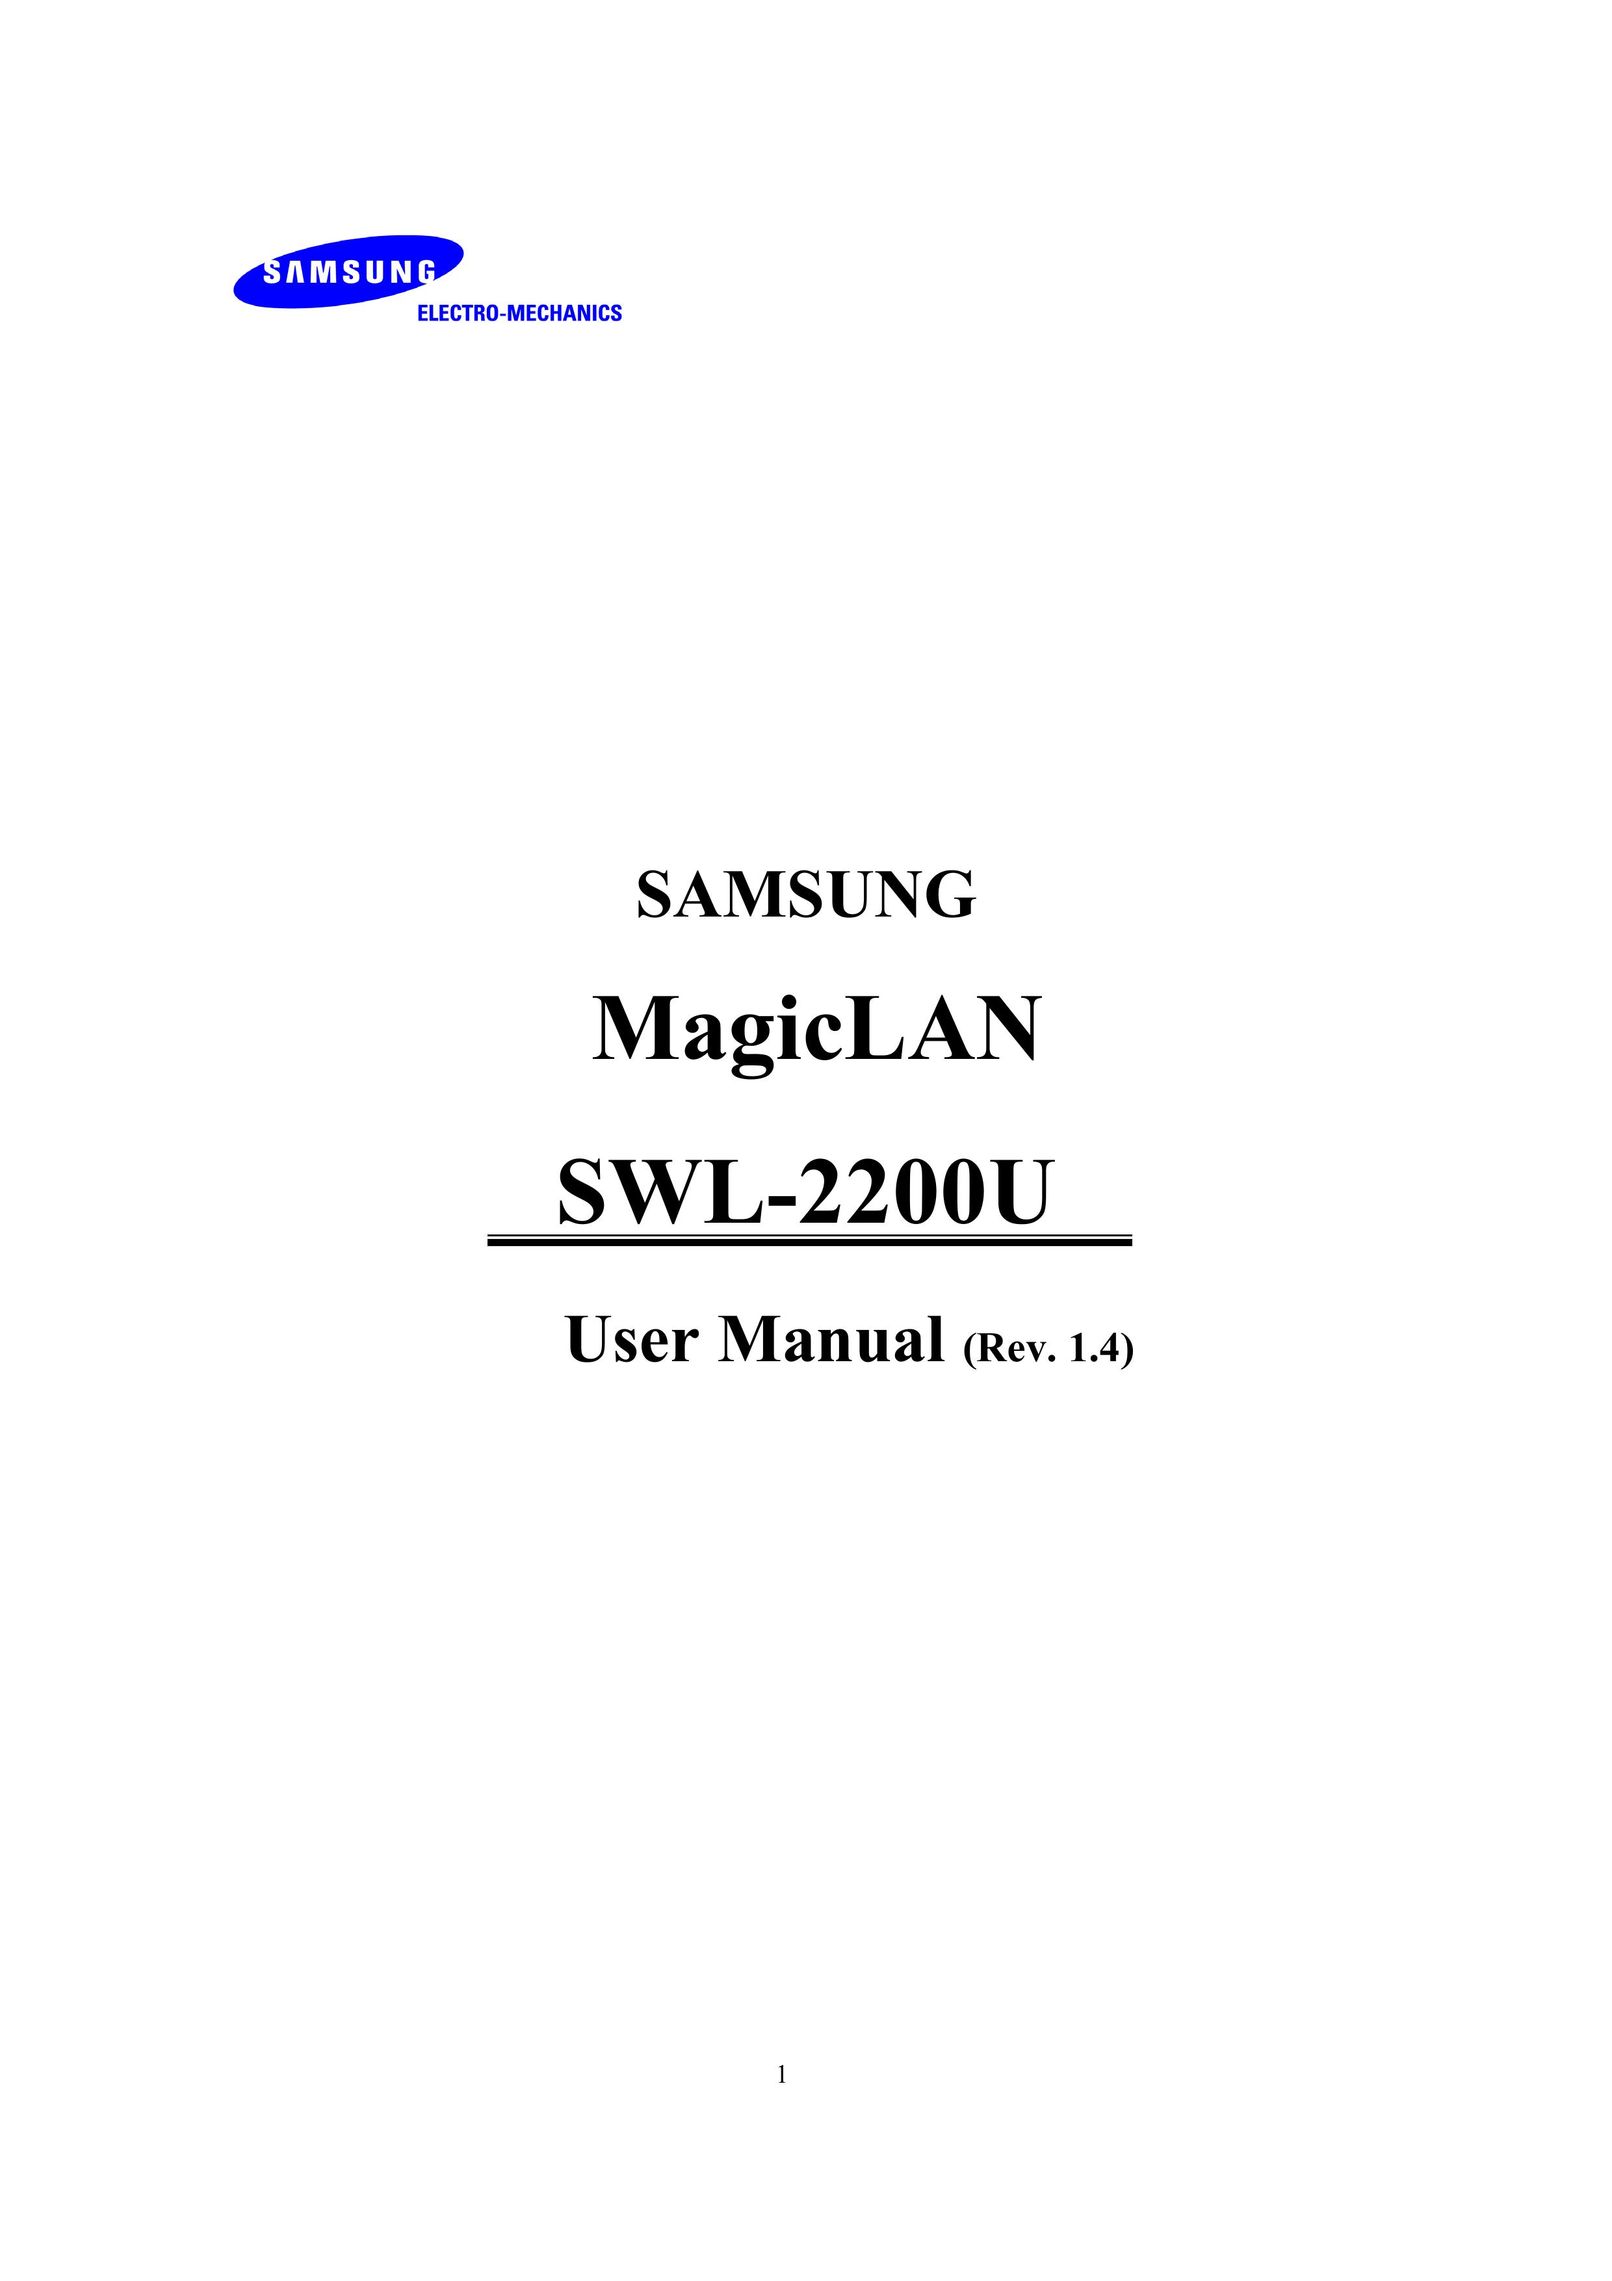 Samsung SWL-2200U Network Router User Manual